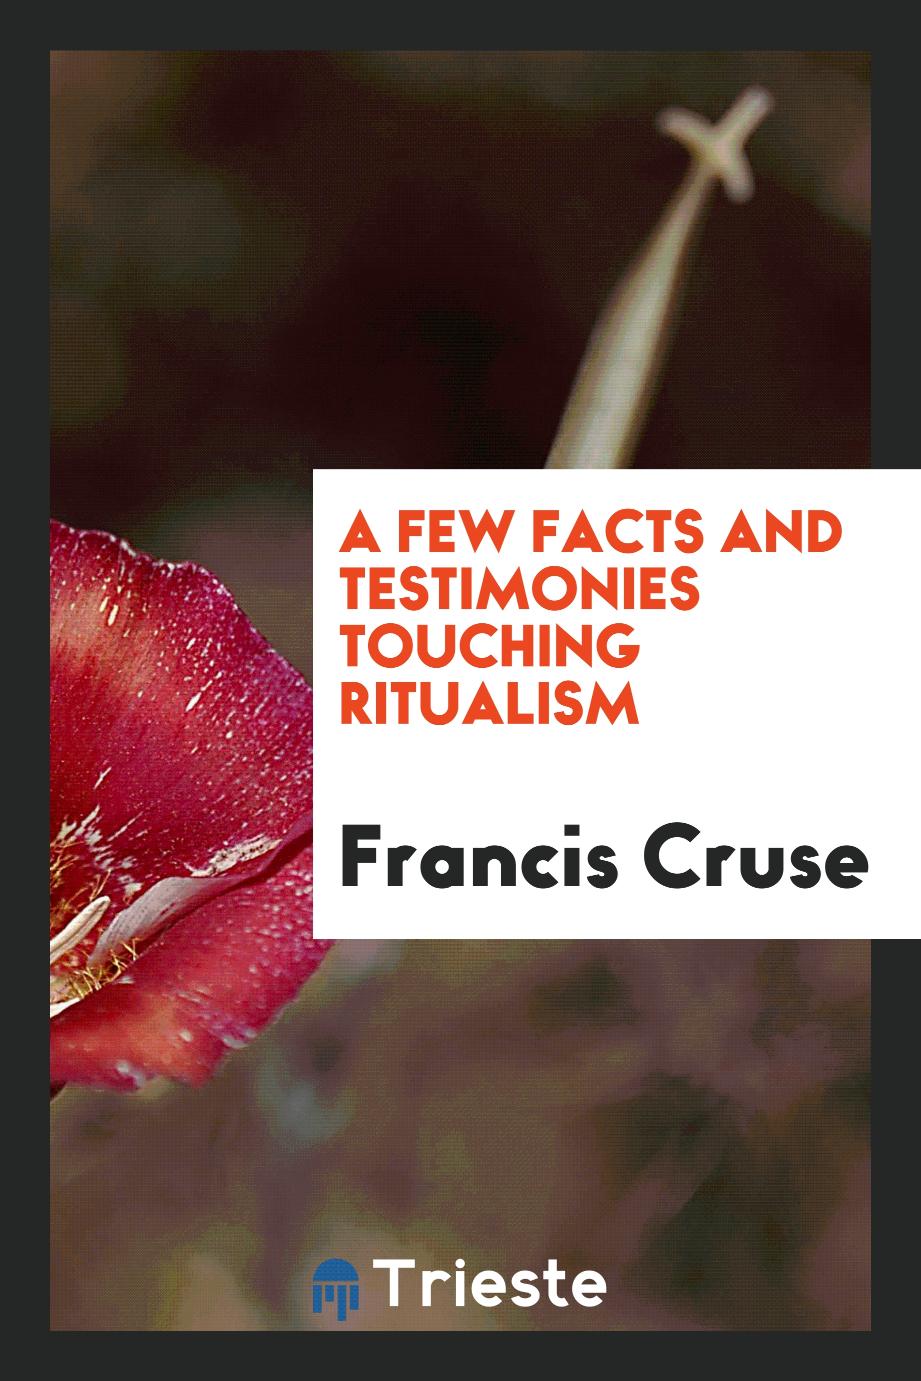 A few facts and testimonies touching ritualism